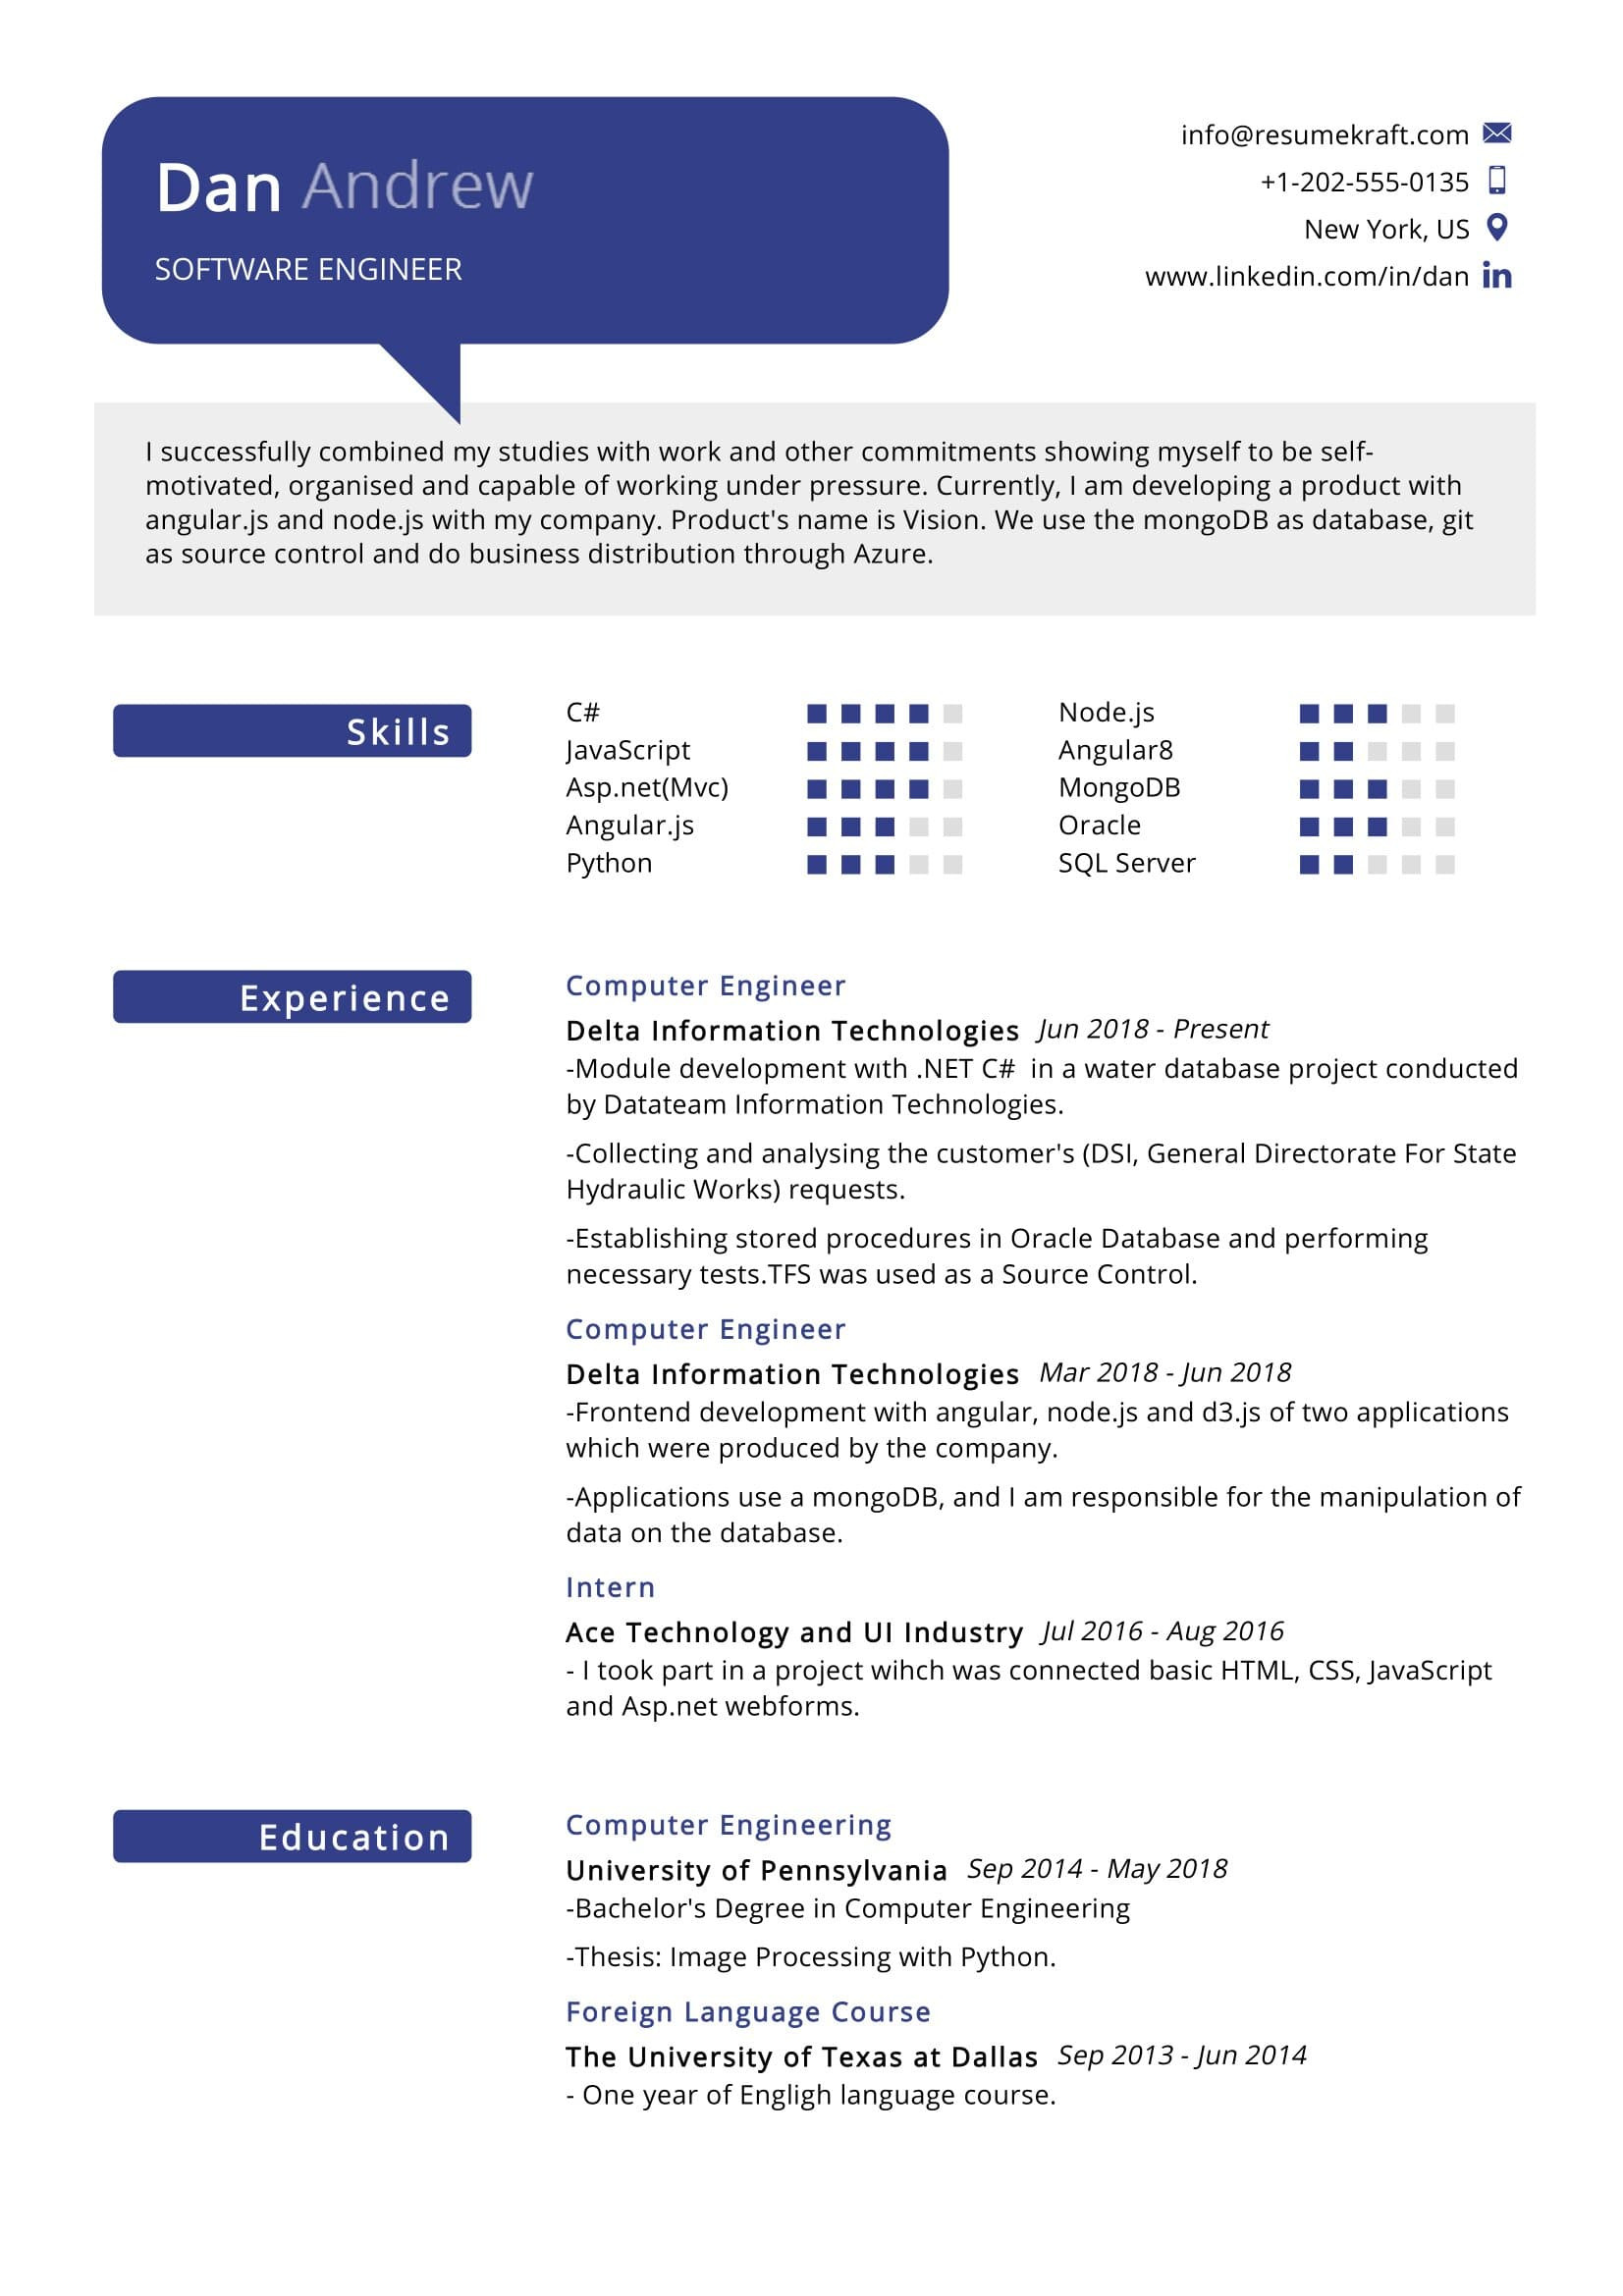 Sample Resume Templates for software Engineer software Engineer Resume Sample 2021 Writing Tips – Resumekraft